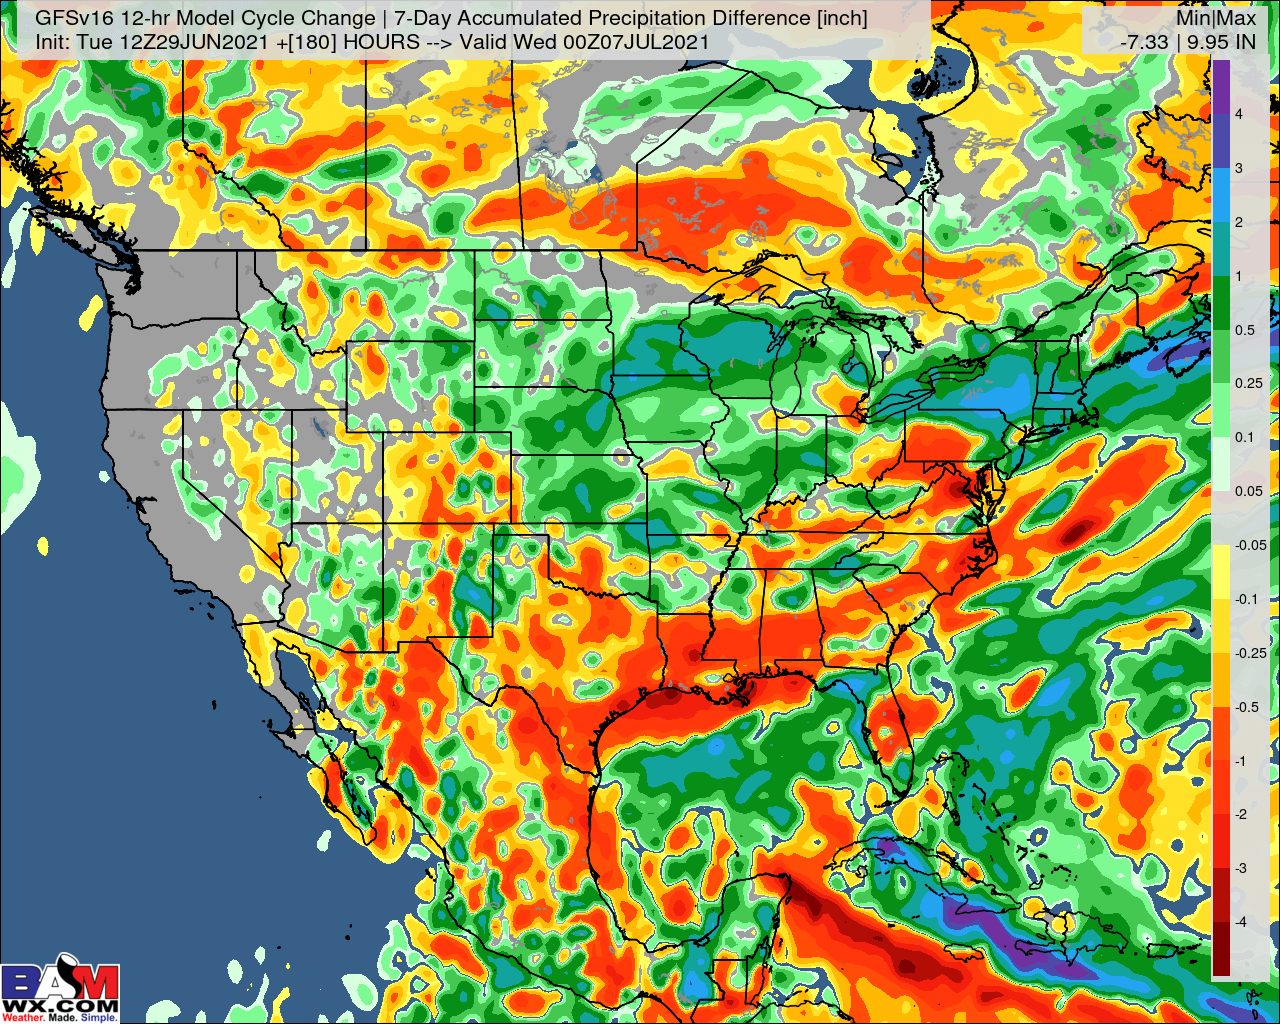 6-29-21 PM GFS Ag Weather Report: Analyzing the volatile late week 1 wetter trends today. B.